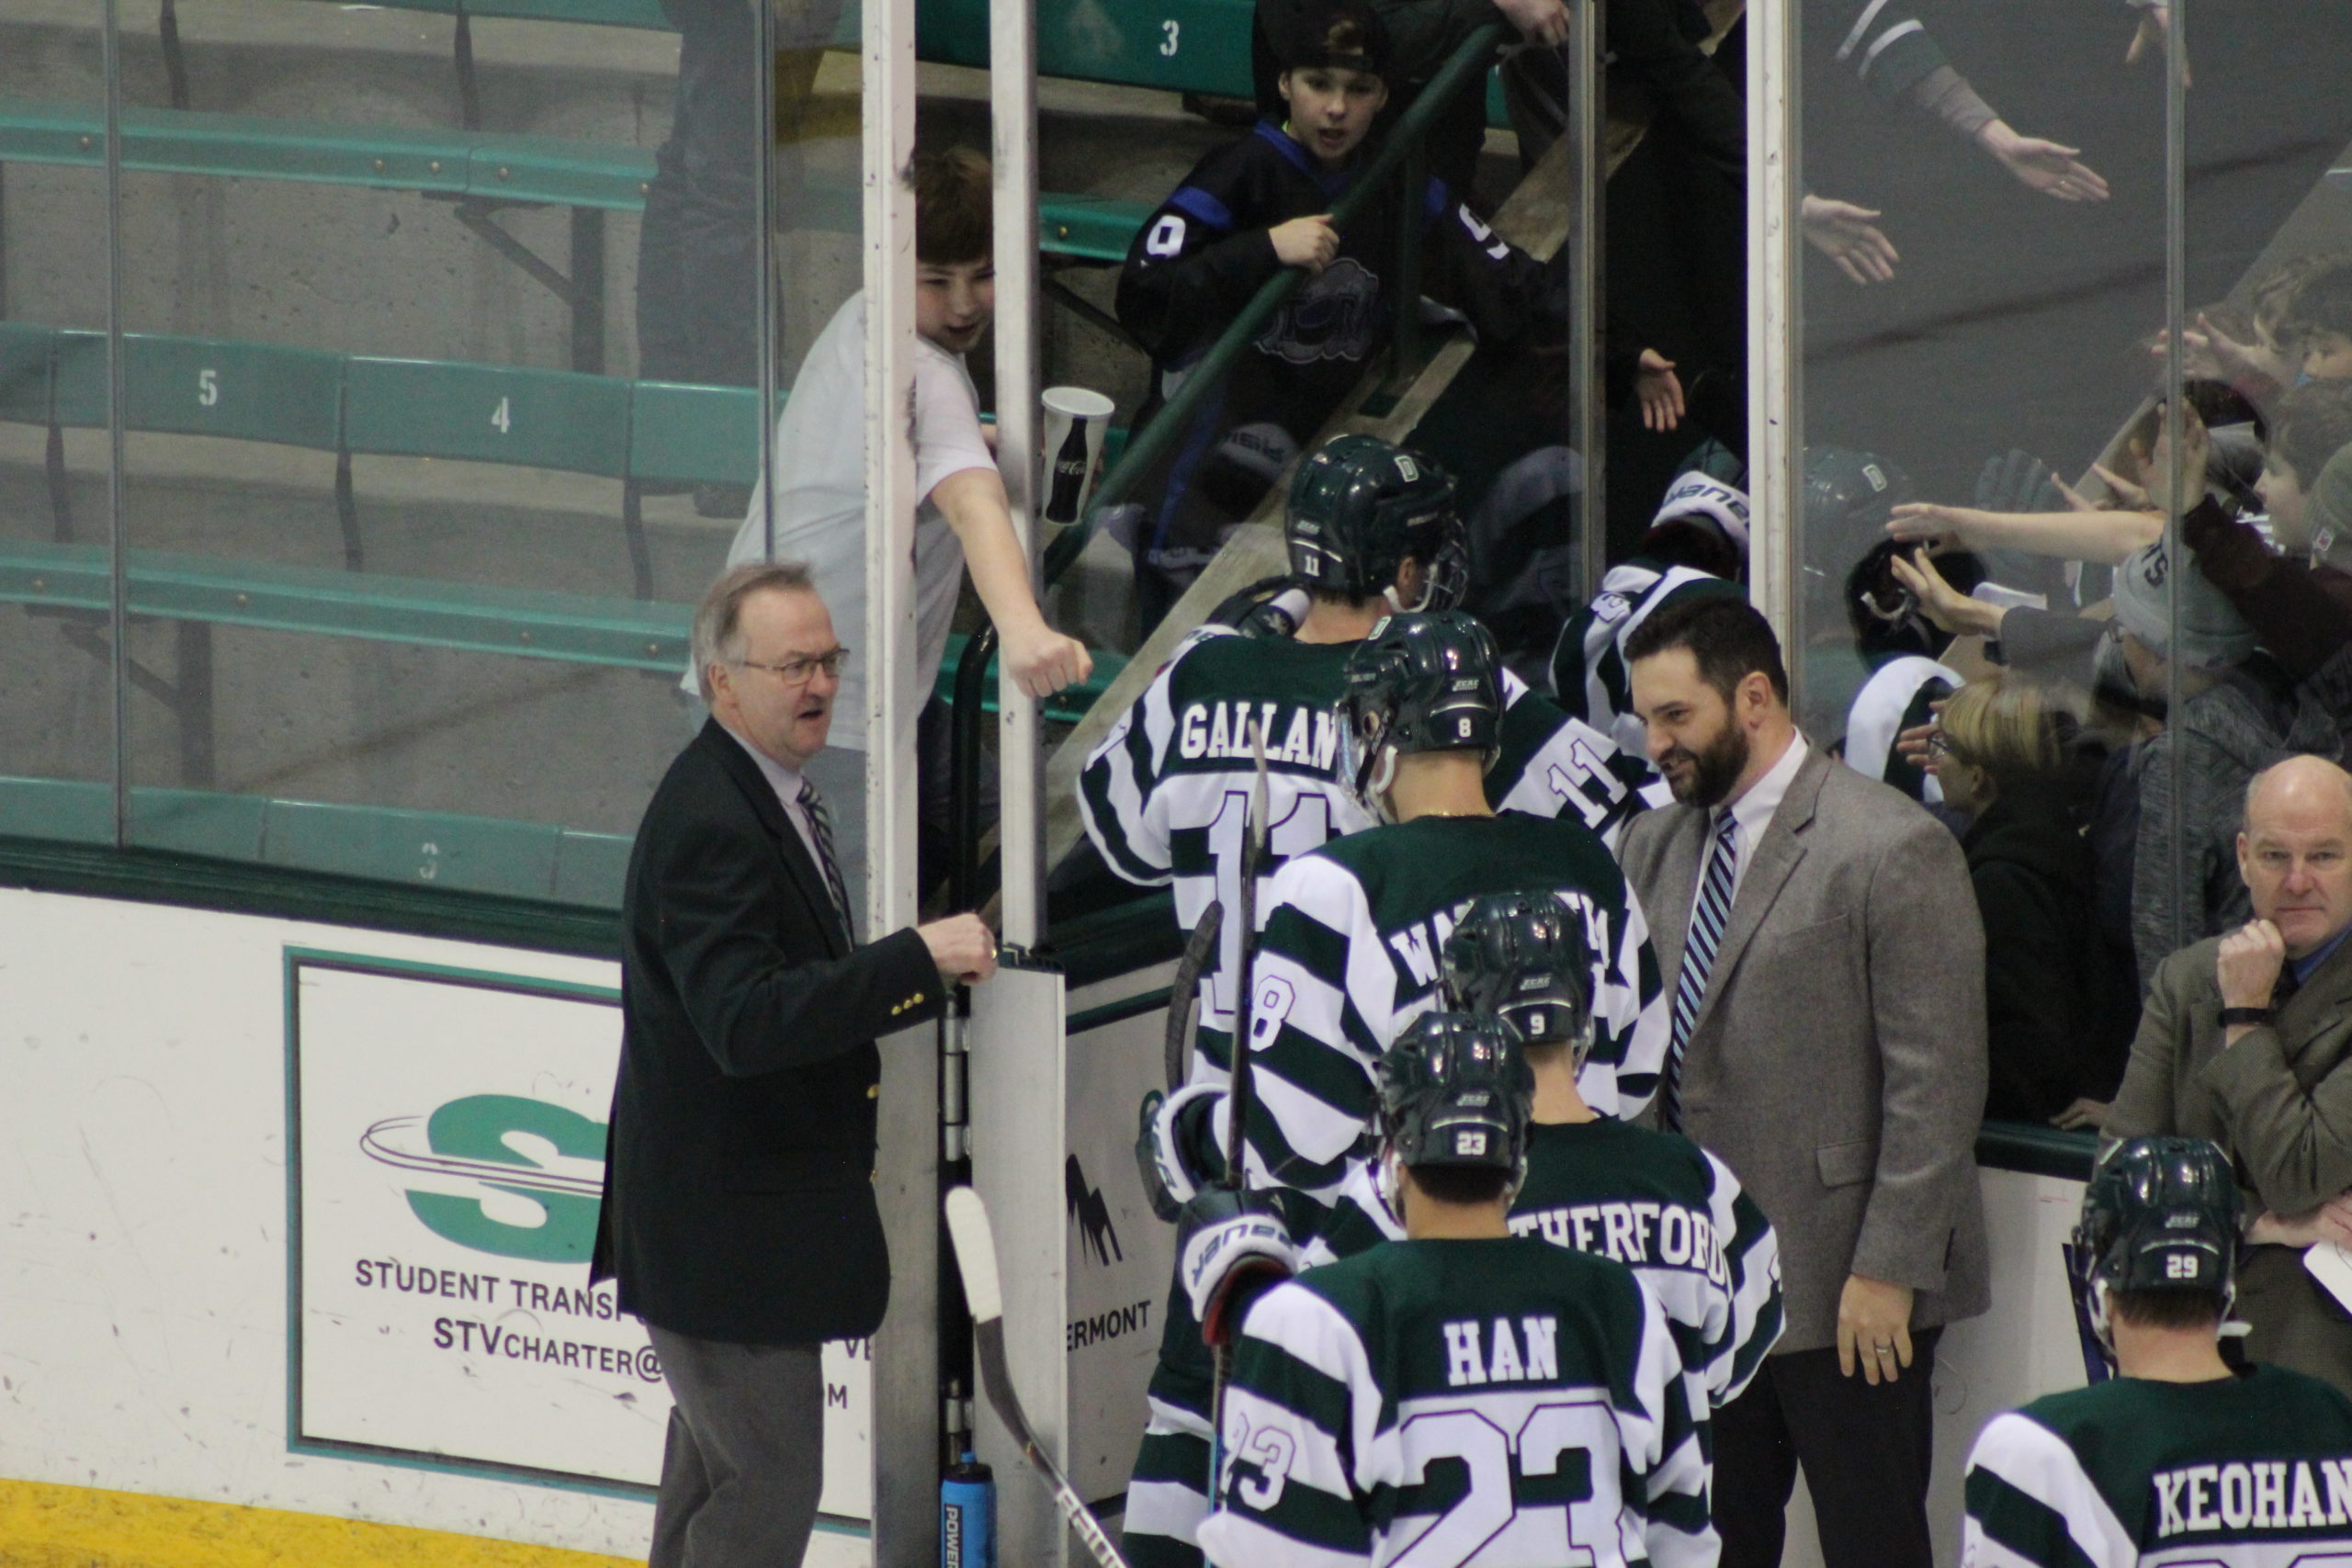 Dartmouth’s Gaudet Reaches Milestone 1,000th Game Coached